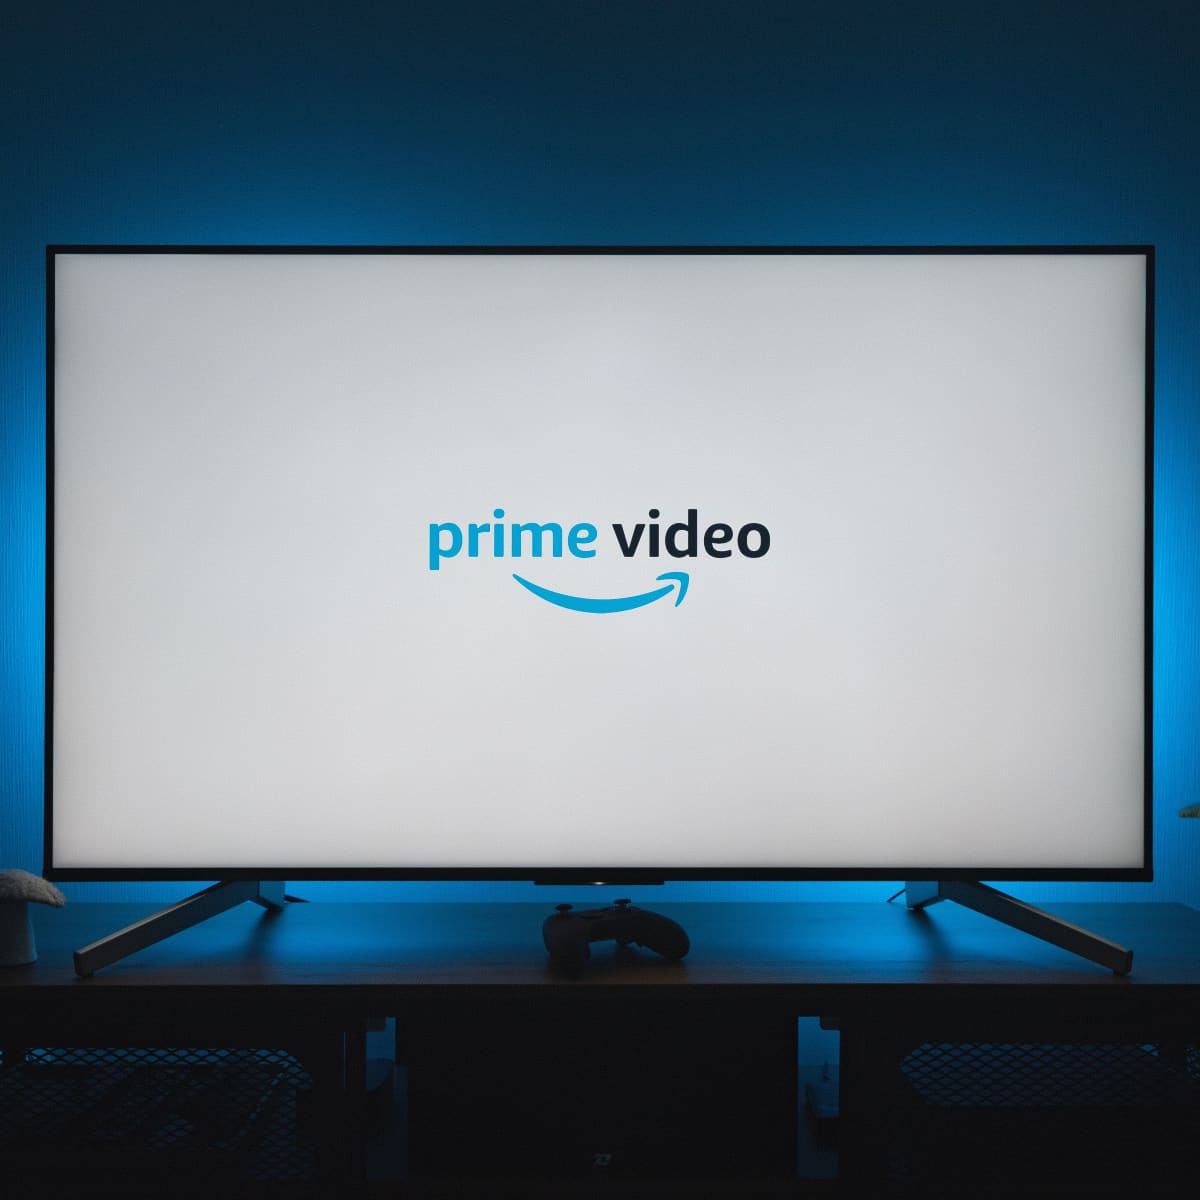 What's this PRIME VIDEO 888 802 3080 WA Charge? - HubPages